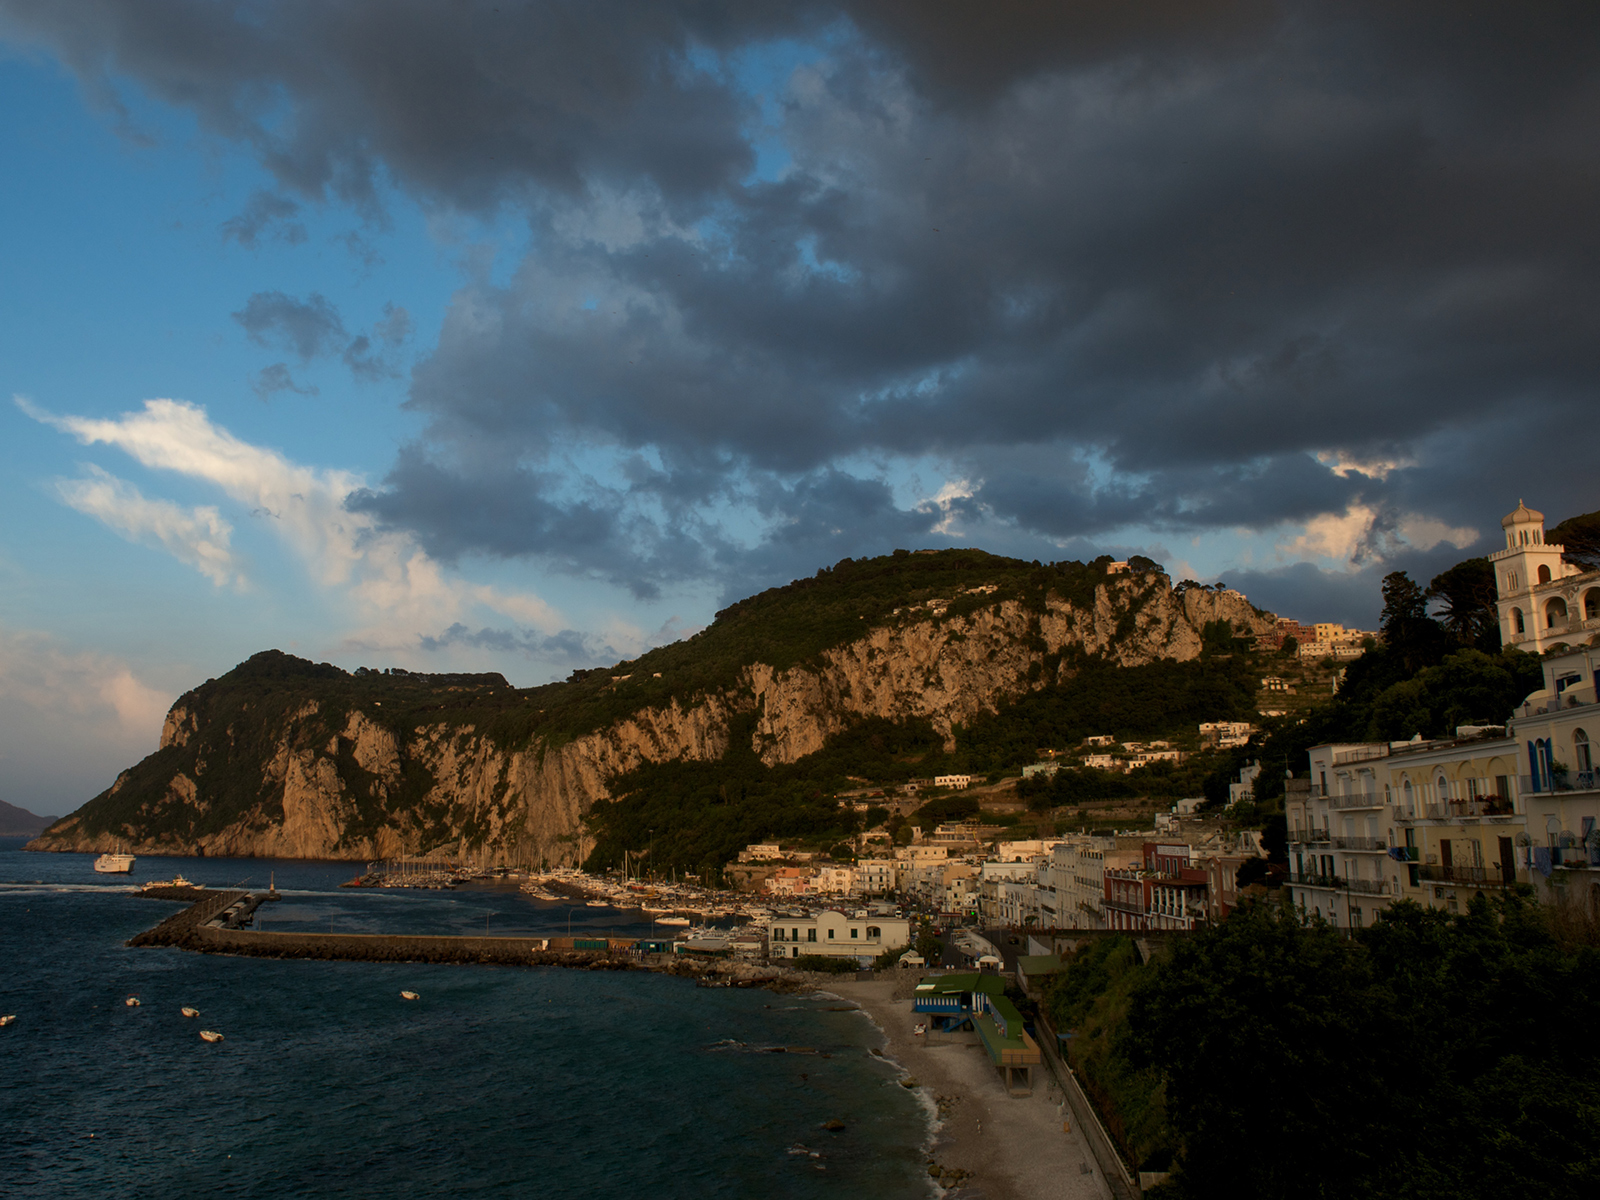 dark clouds gather above the harbour in the town of Capri, Italy